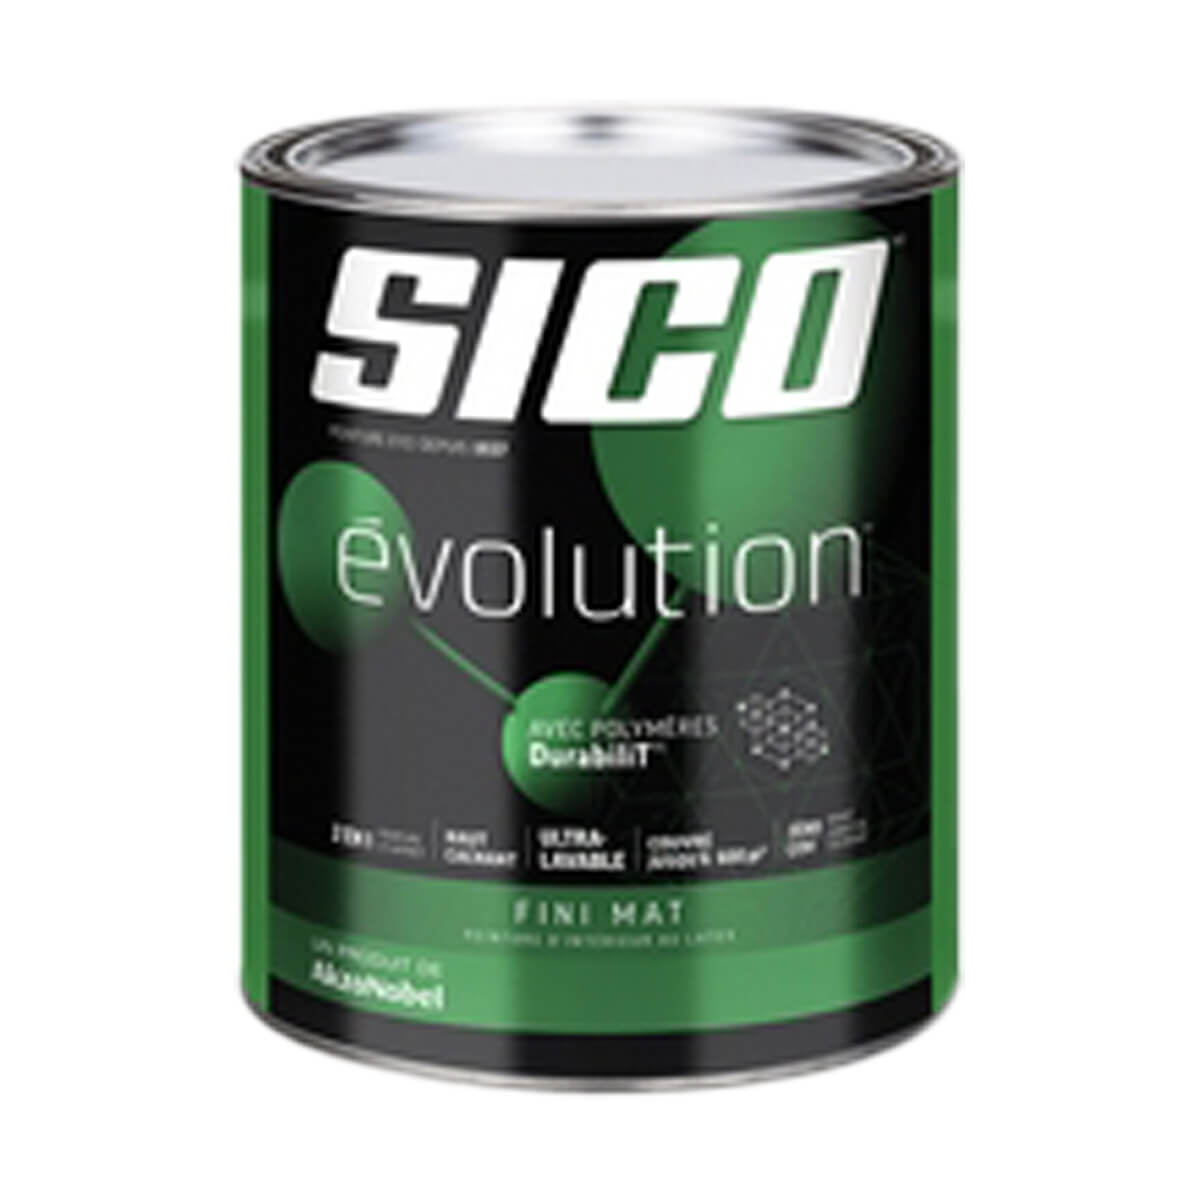 Sico Evolution Interior Latex Paint for Flat Ceilings Series 861